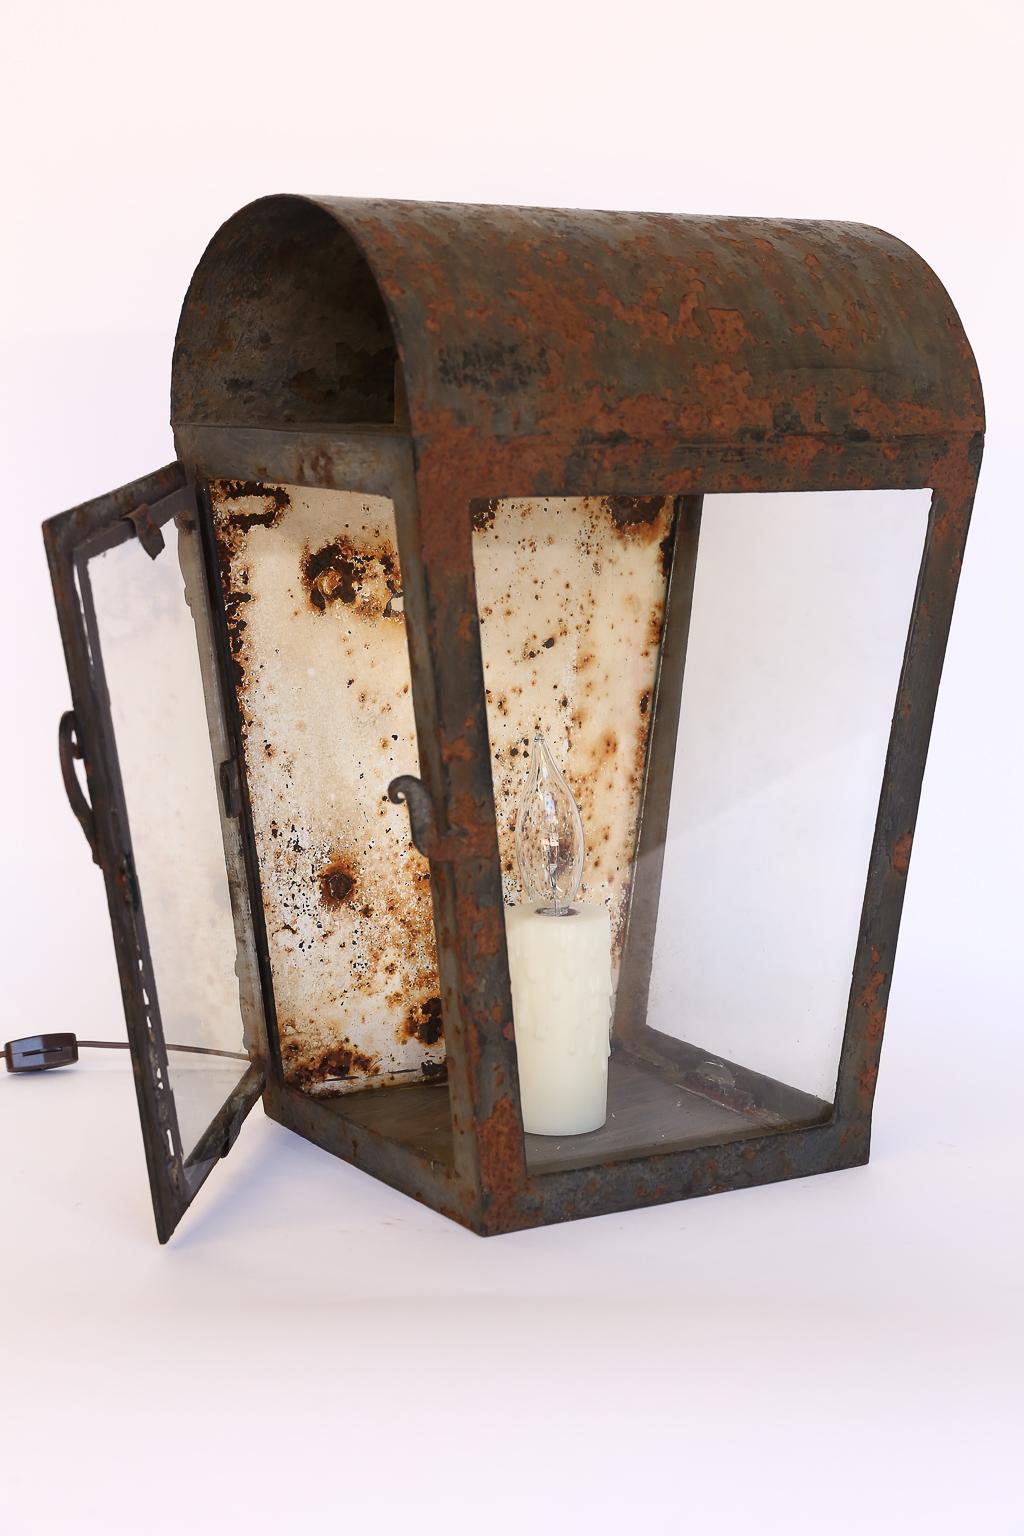 Rustic lantern table lamp. We gave this charming old lantern a new life by making it into a table lamp. It would make a nice statement in any decor.